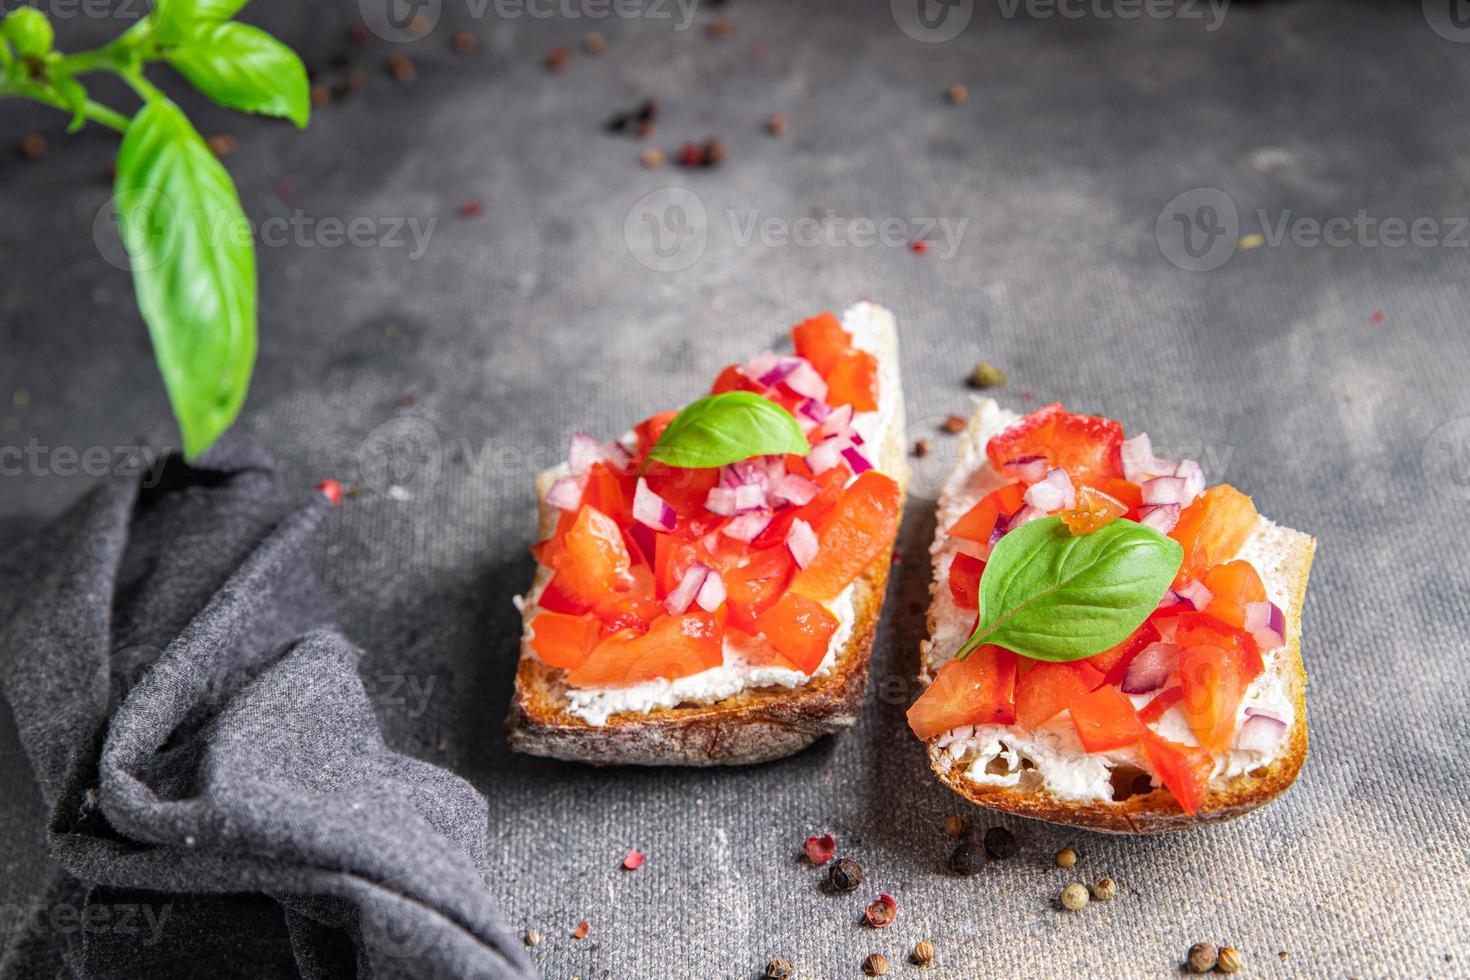 bruschetta basil tomato sandwich snack vegetables healthy meal food snack diet on the table copy space food background rustic top view veggie photo